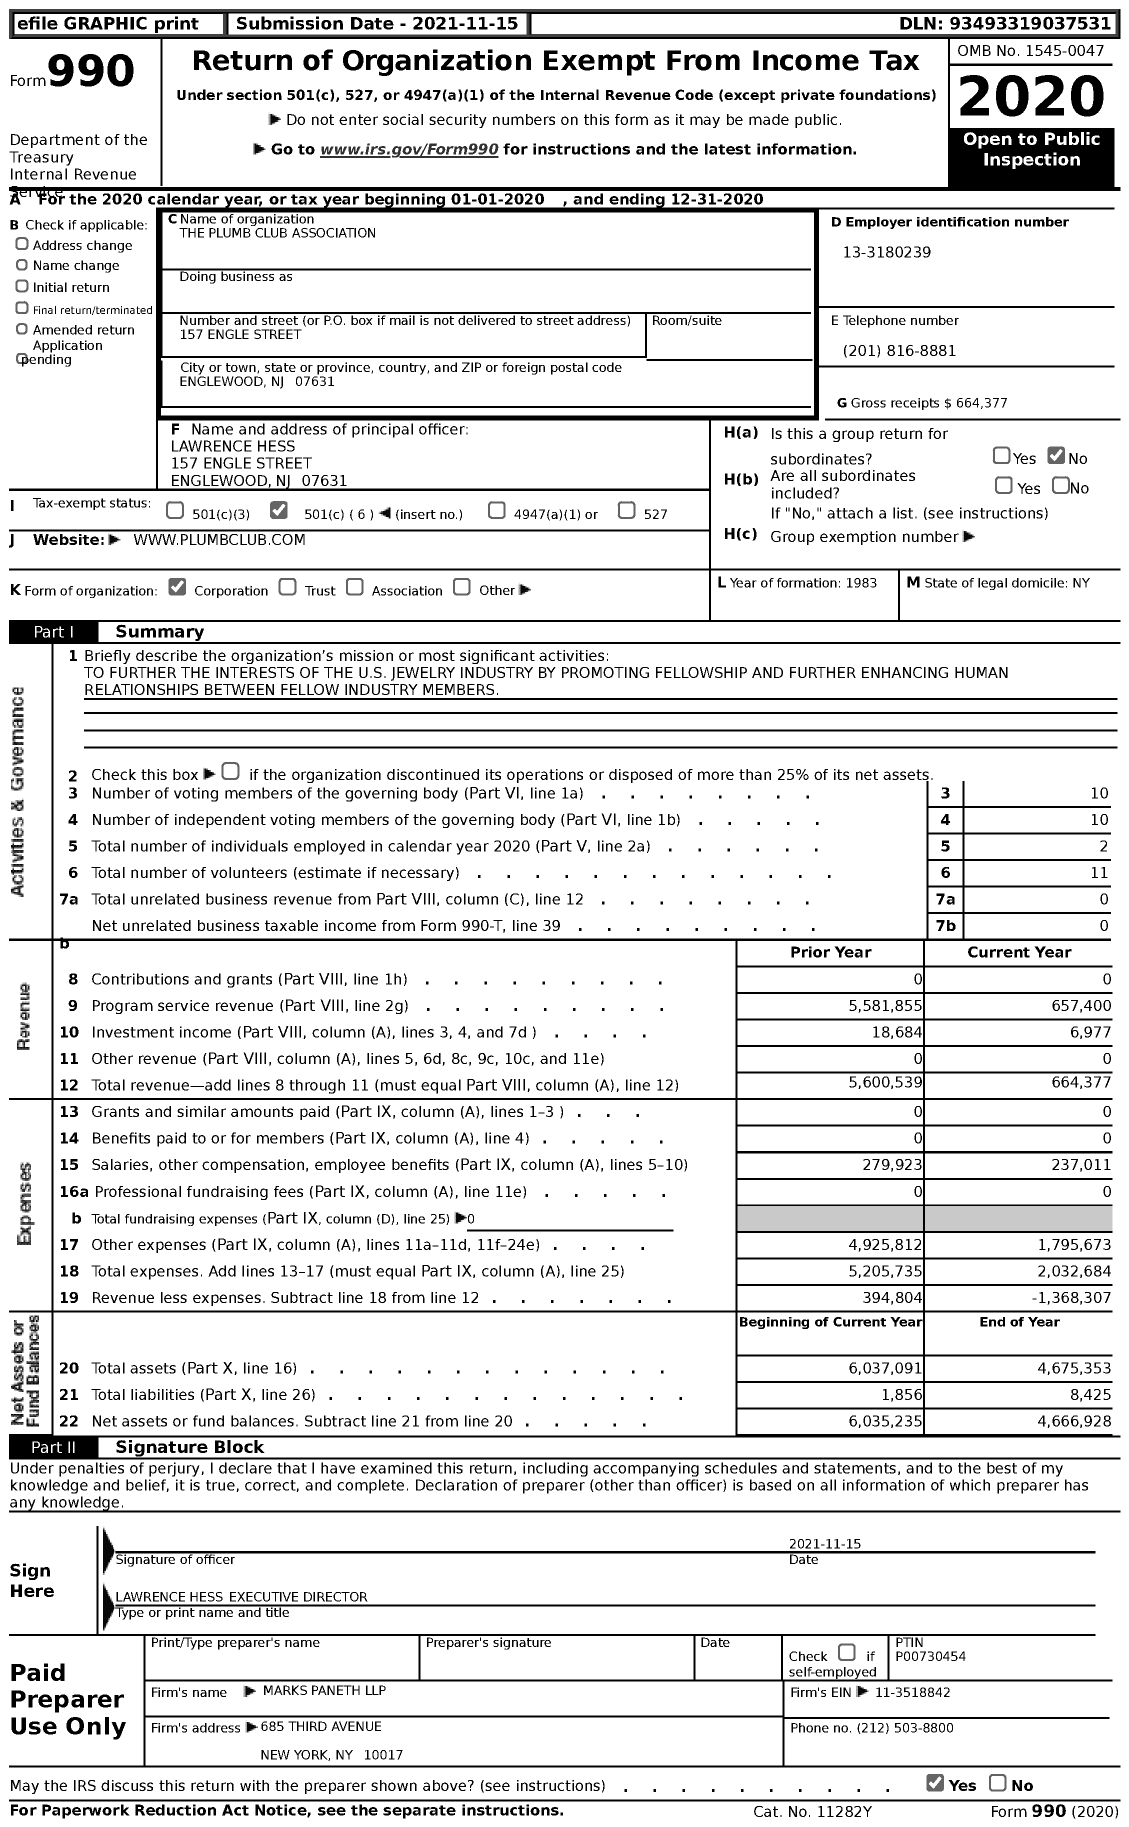 Image of first page of 2020 Form 990 for The Plumb Club Association